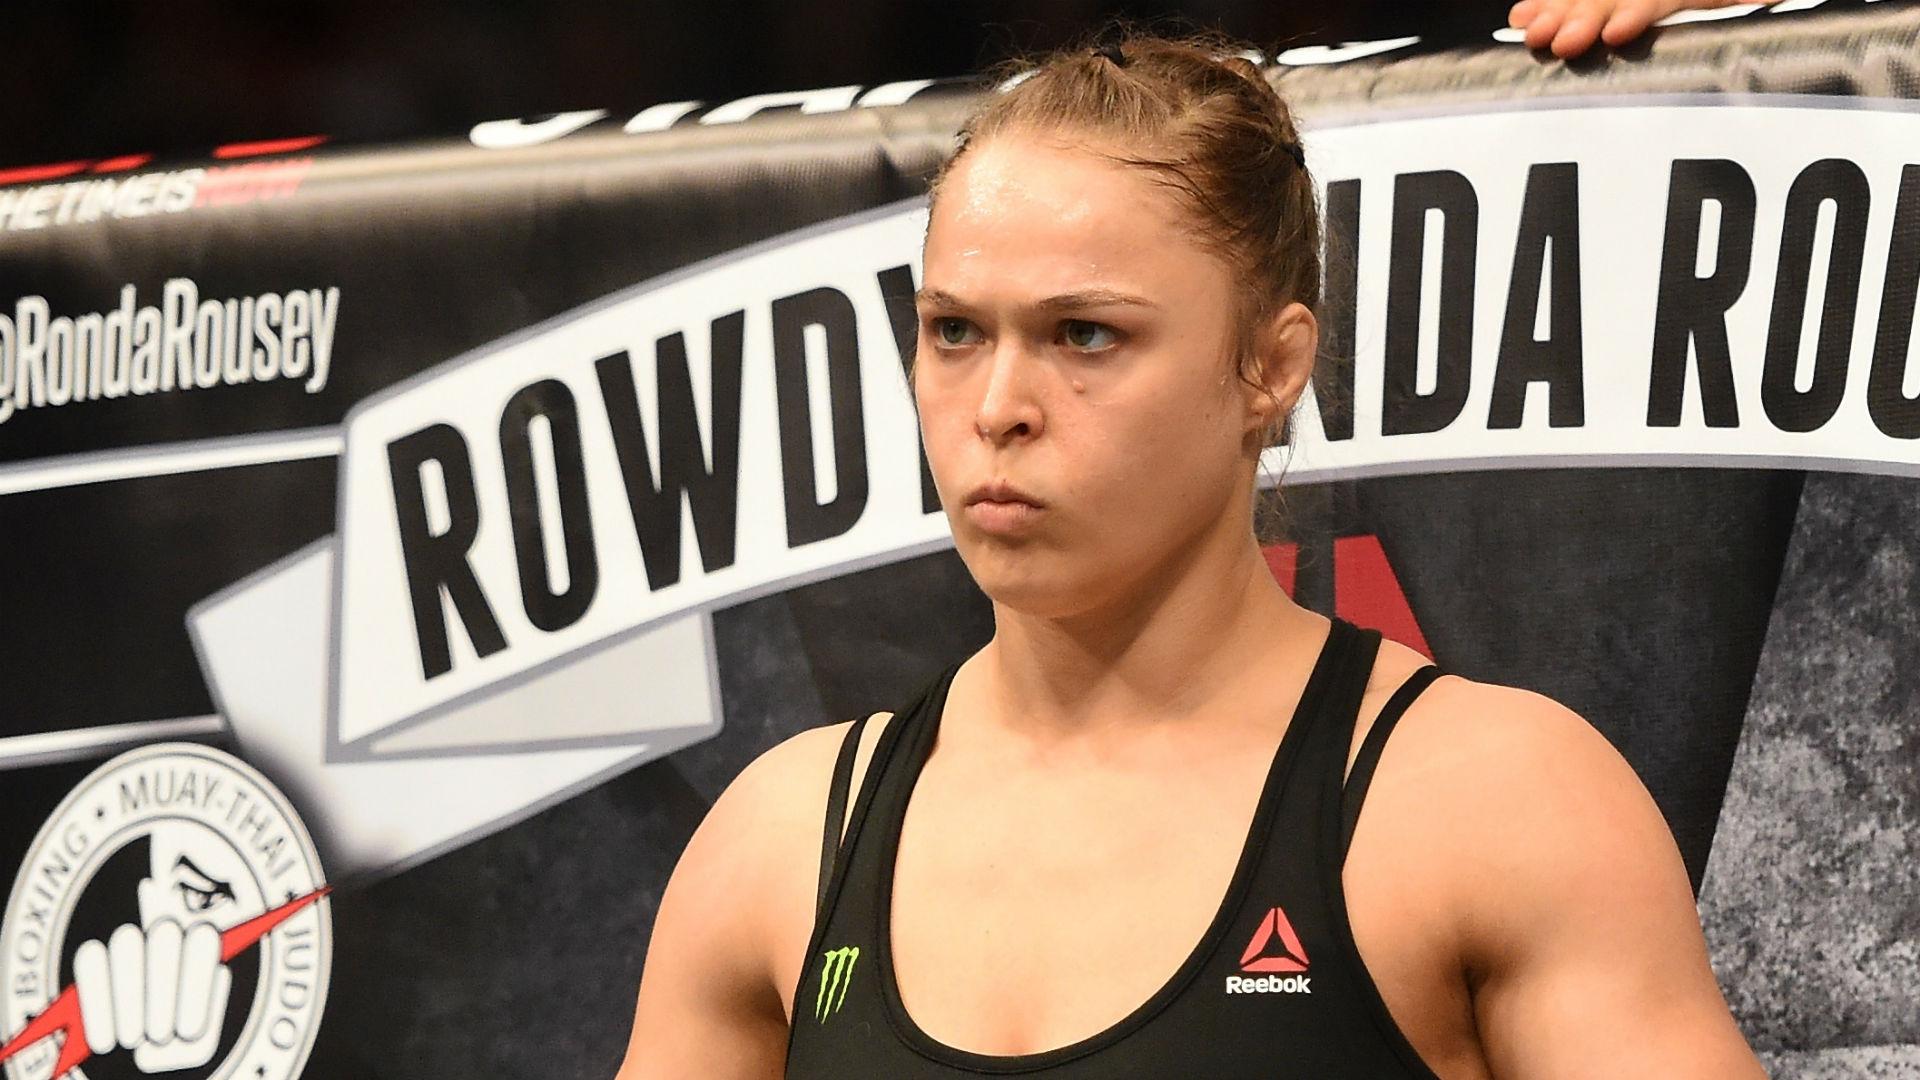 dale hollenbach add photo ronda rousey in nude